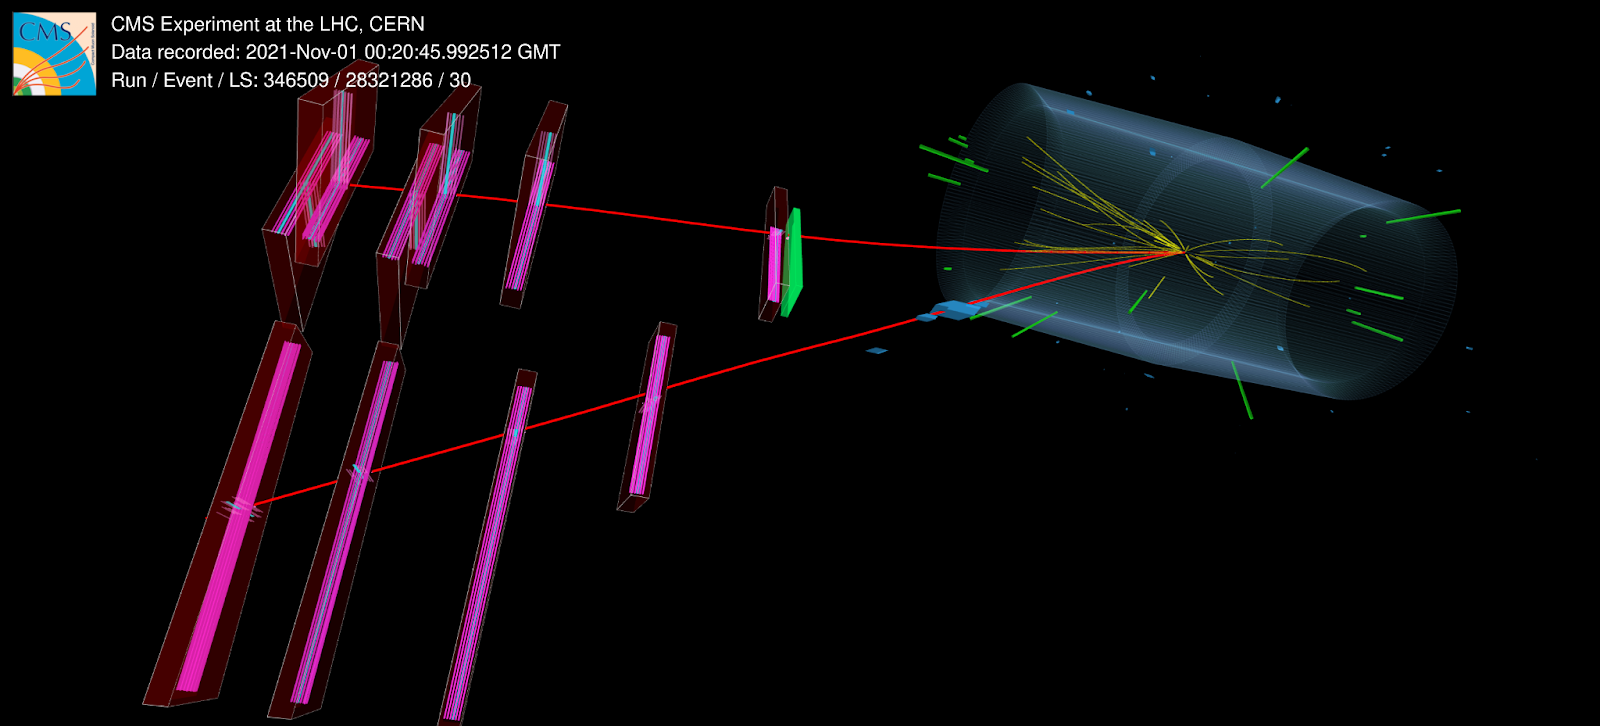 Test beam collision events seen recorded by the CMS detector. Red lines are tracks of muons